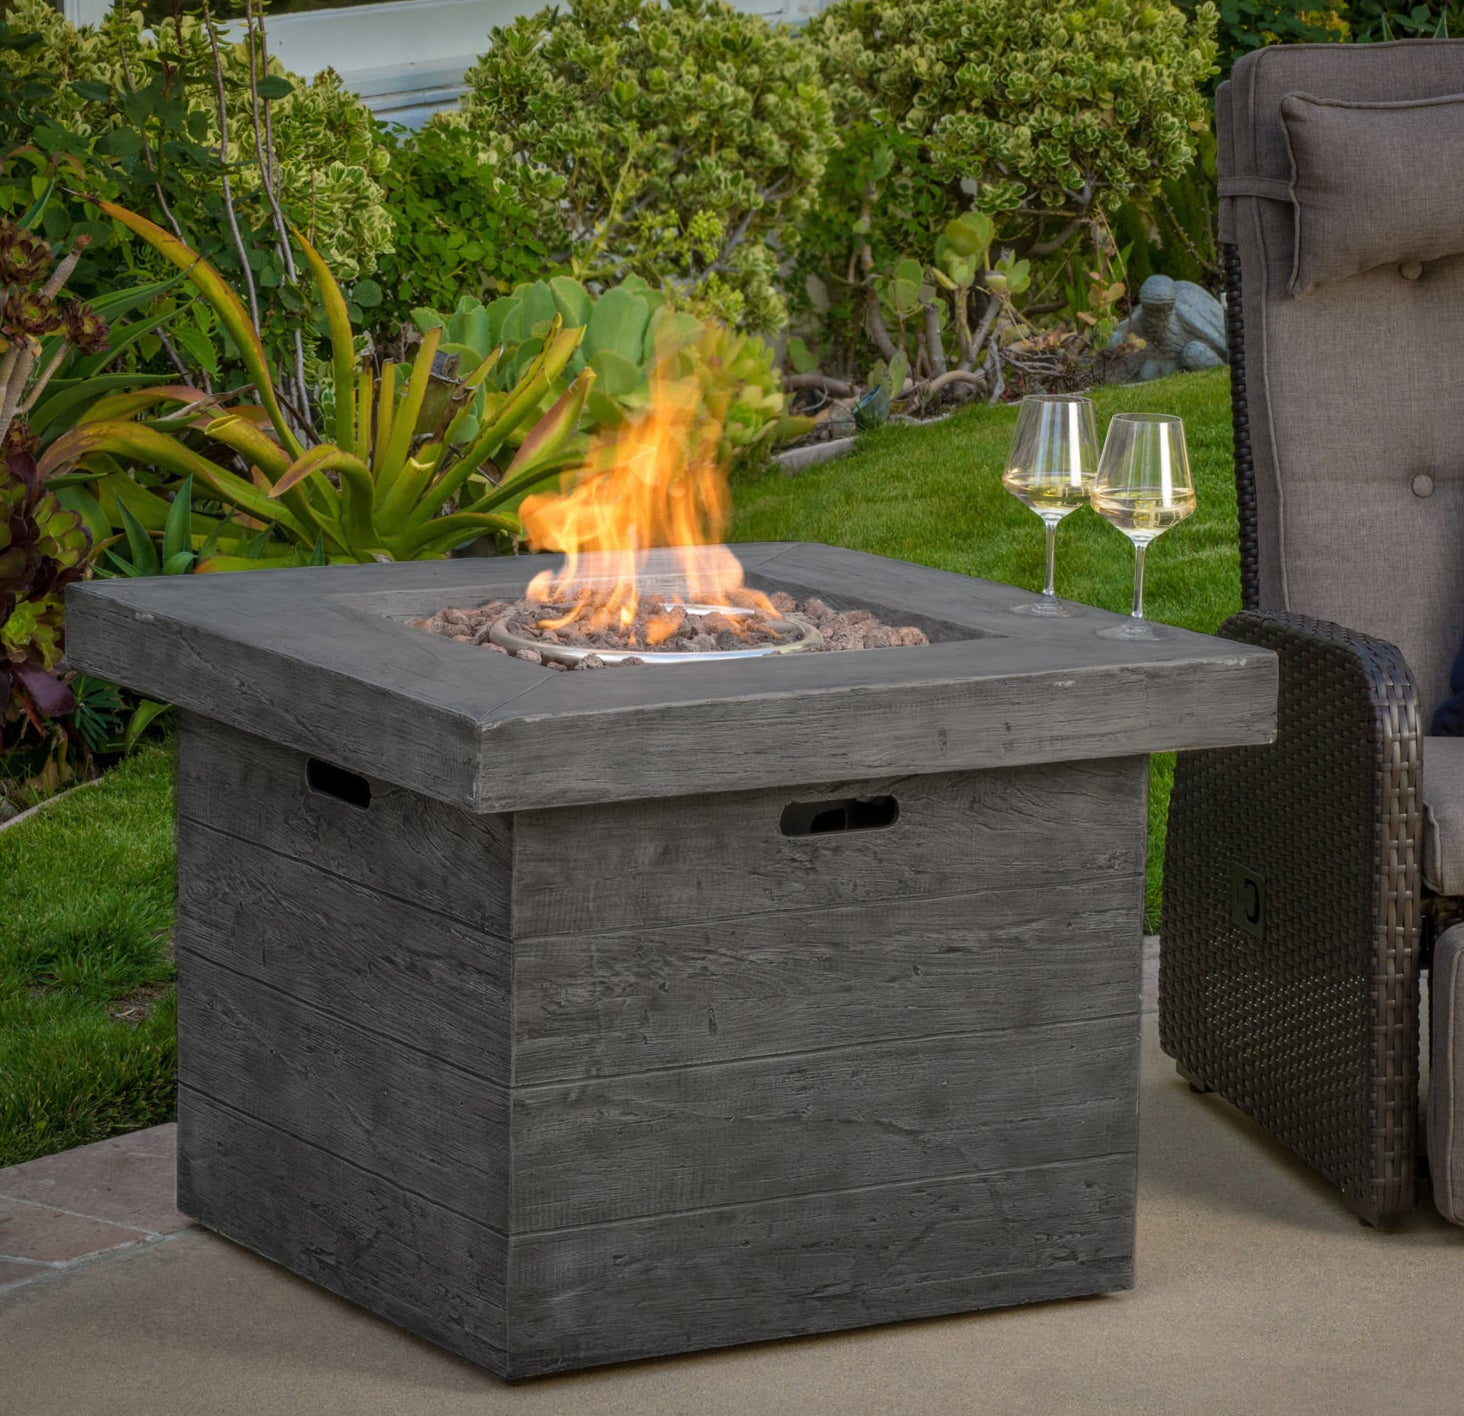 Image of the gray fire pit